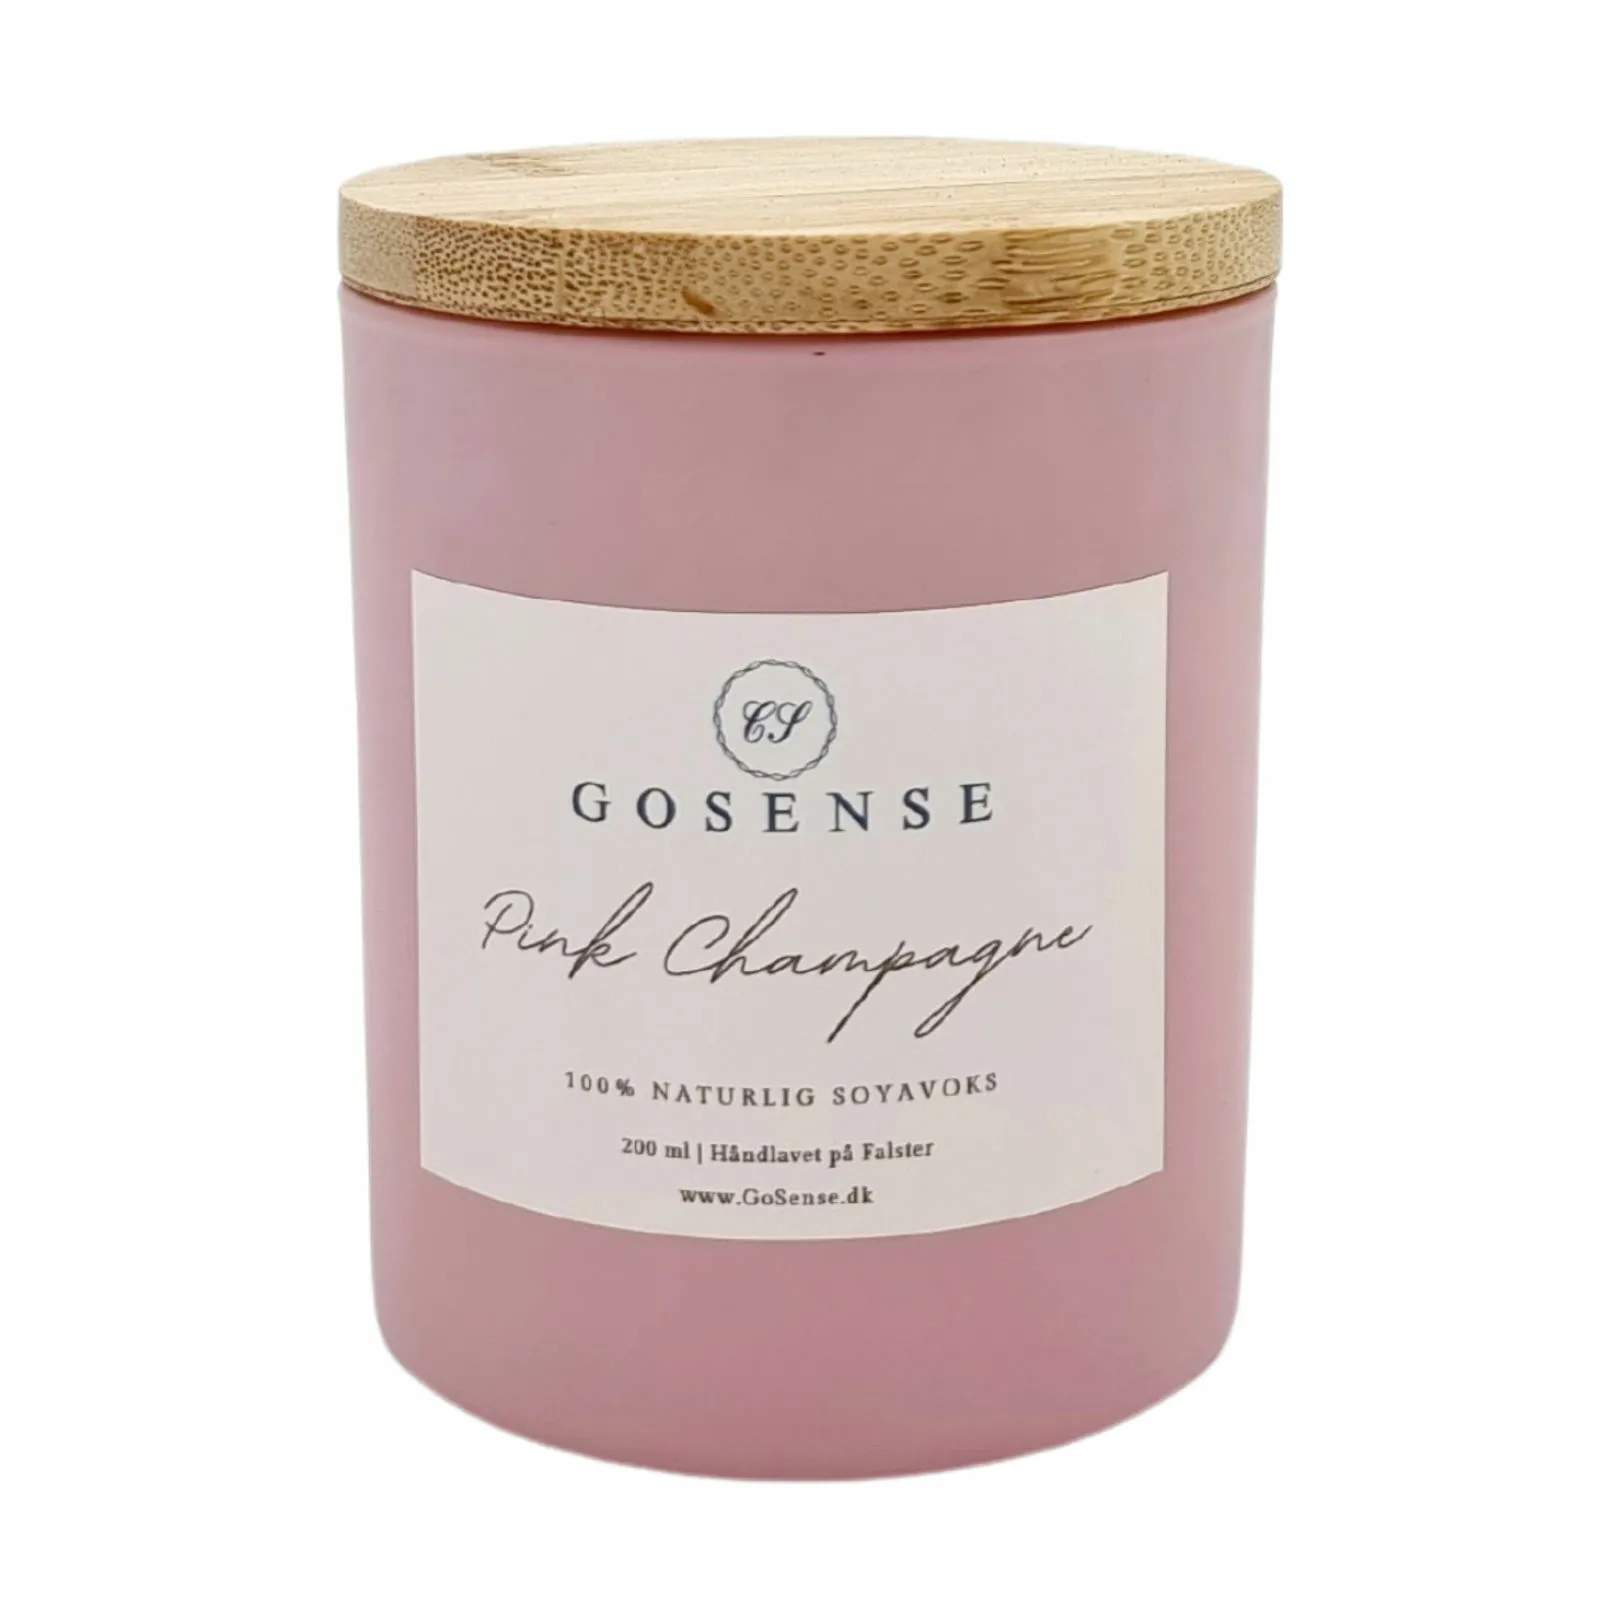 Duftlys, pink champagne, large